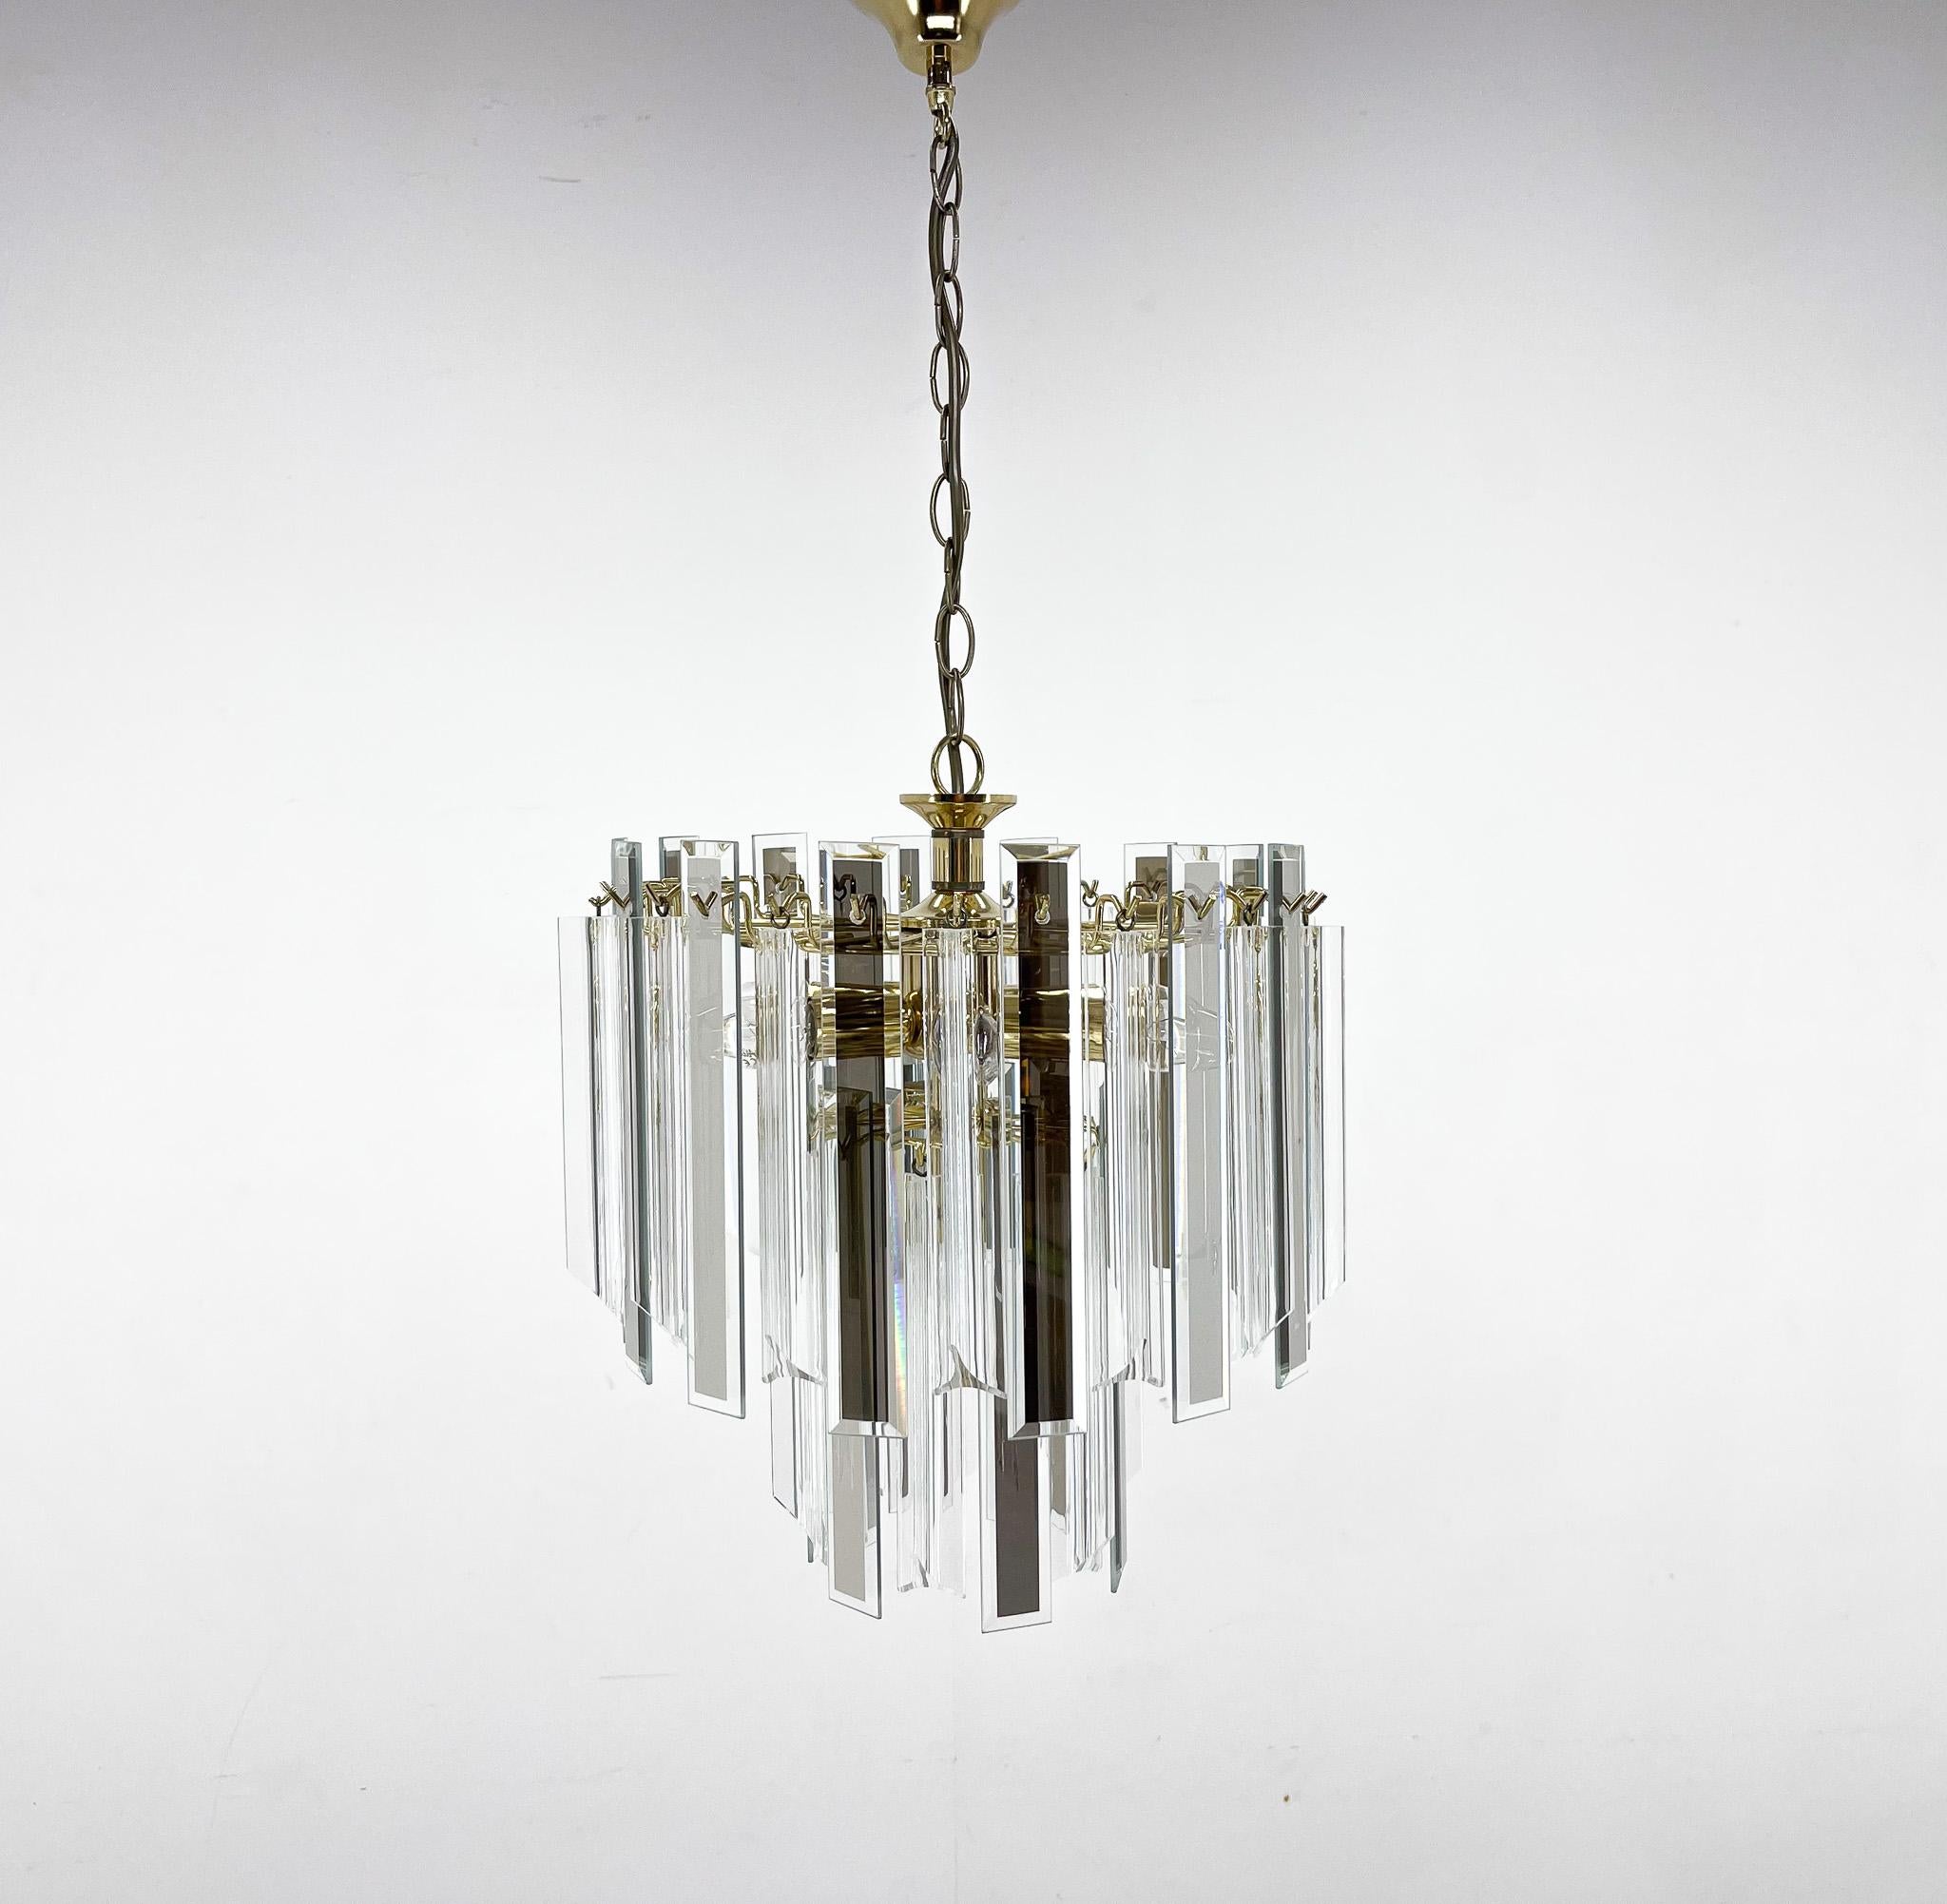 Midcentury brass chandelier with glass and Lucite. Each glass pendant features beveled edge with a mirror center. Lucite strands are three sided. Beautifully illuminating and reflecting light. There are some imperfections (see photo).